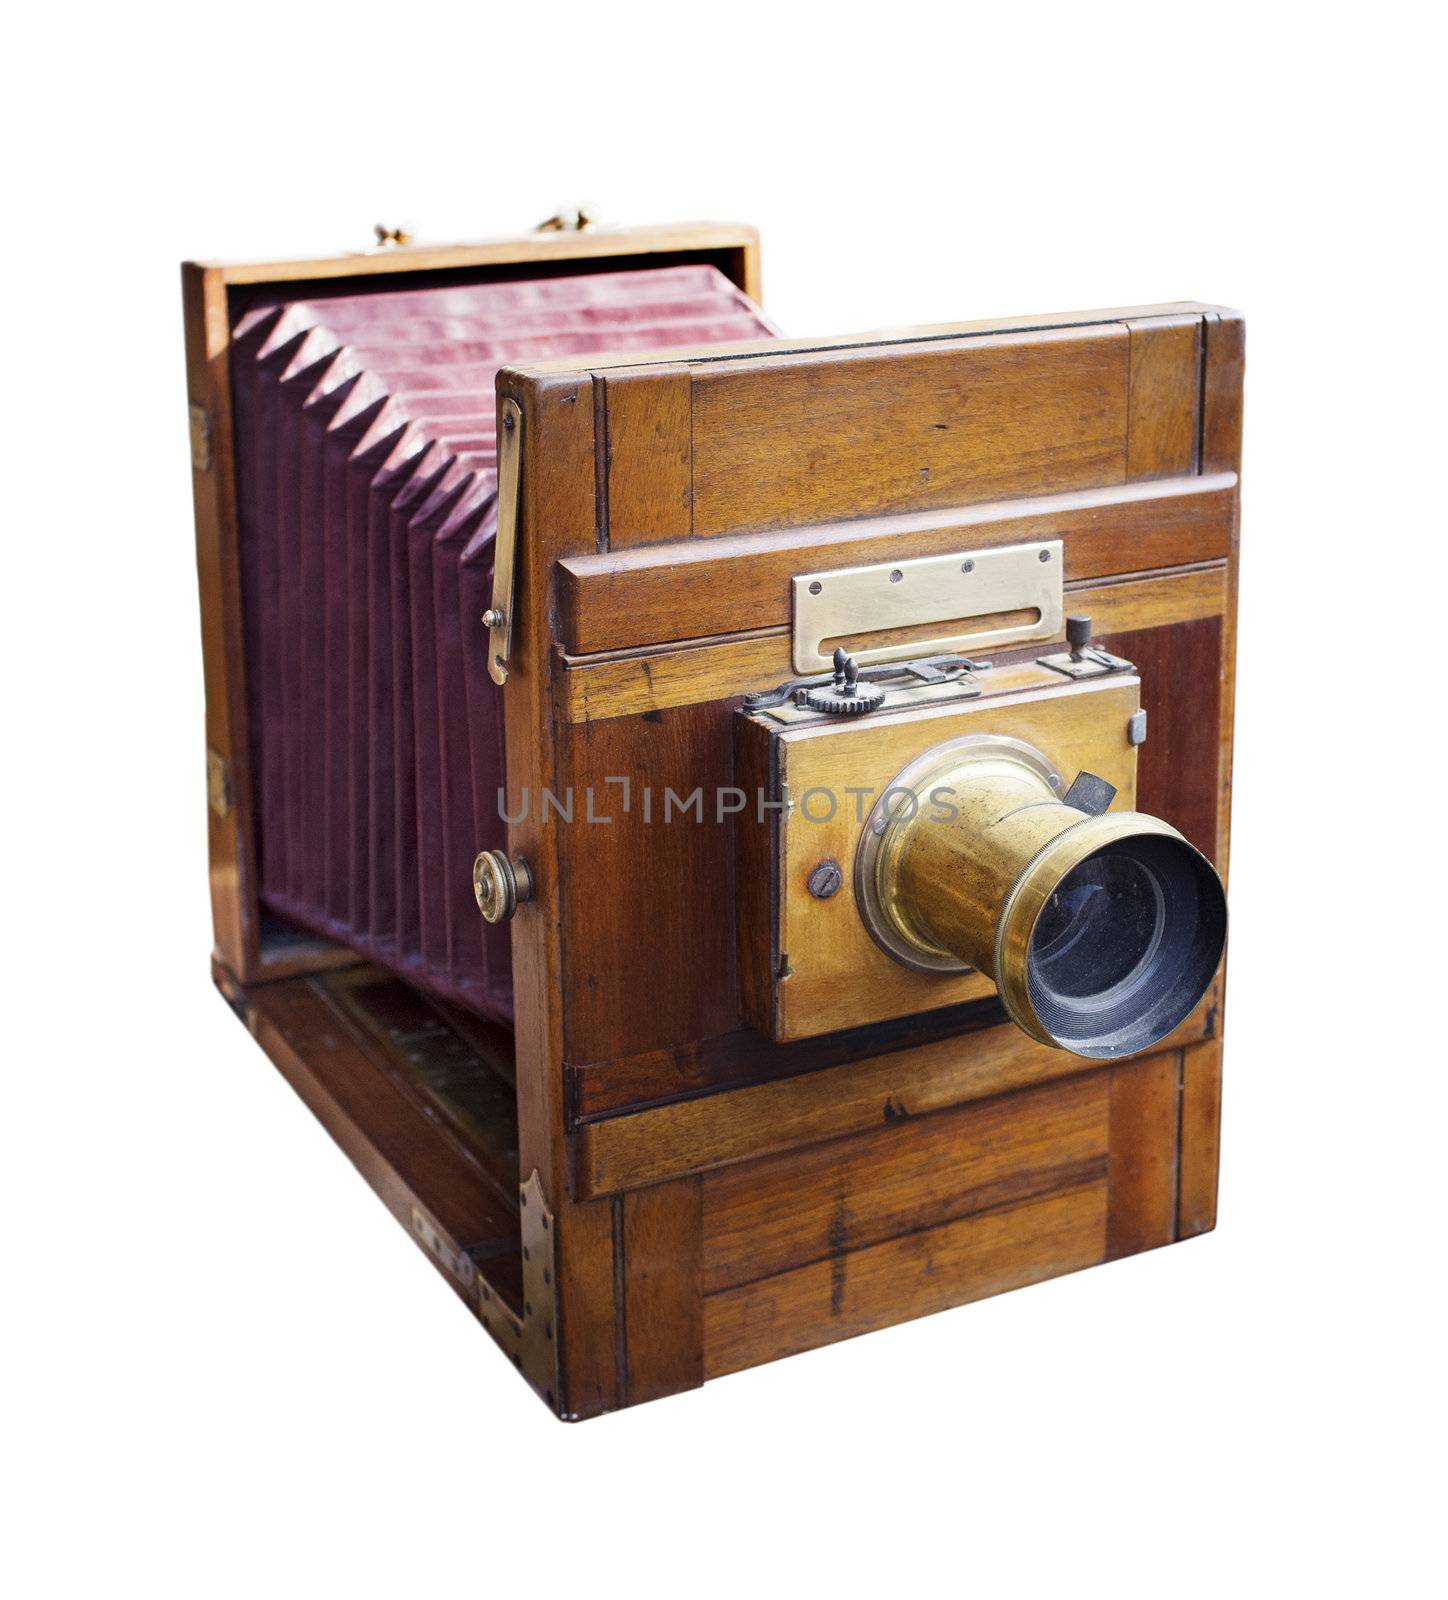 Antique 19th century wooden large format camera with bellows isolated on white.